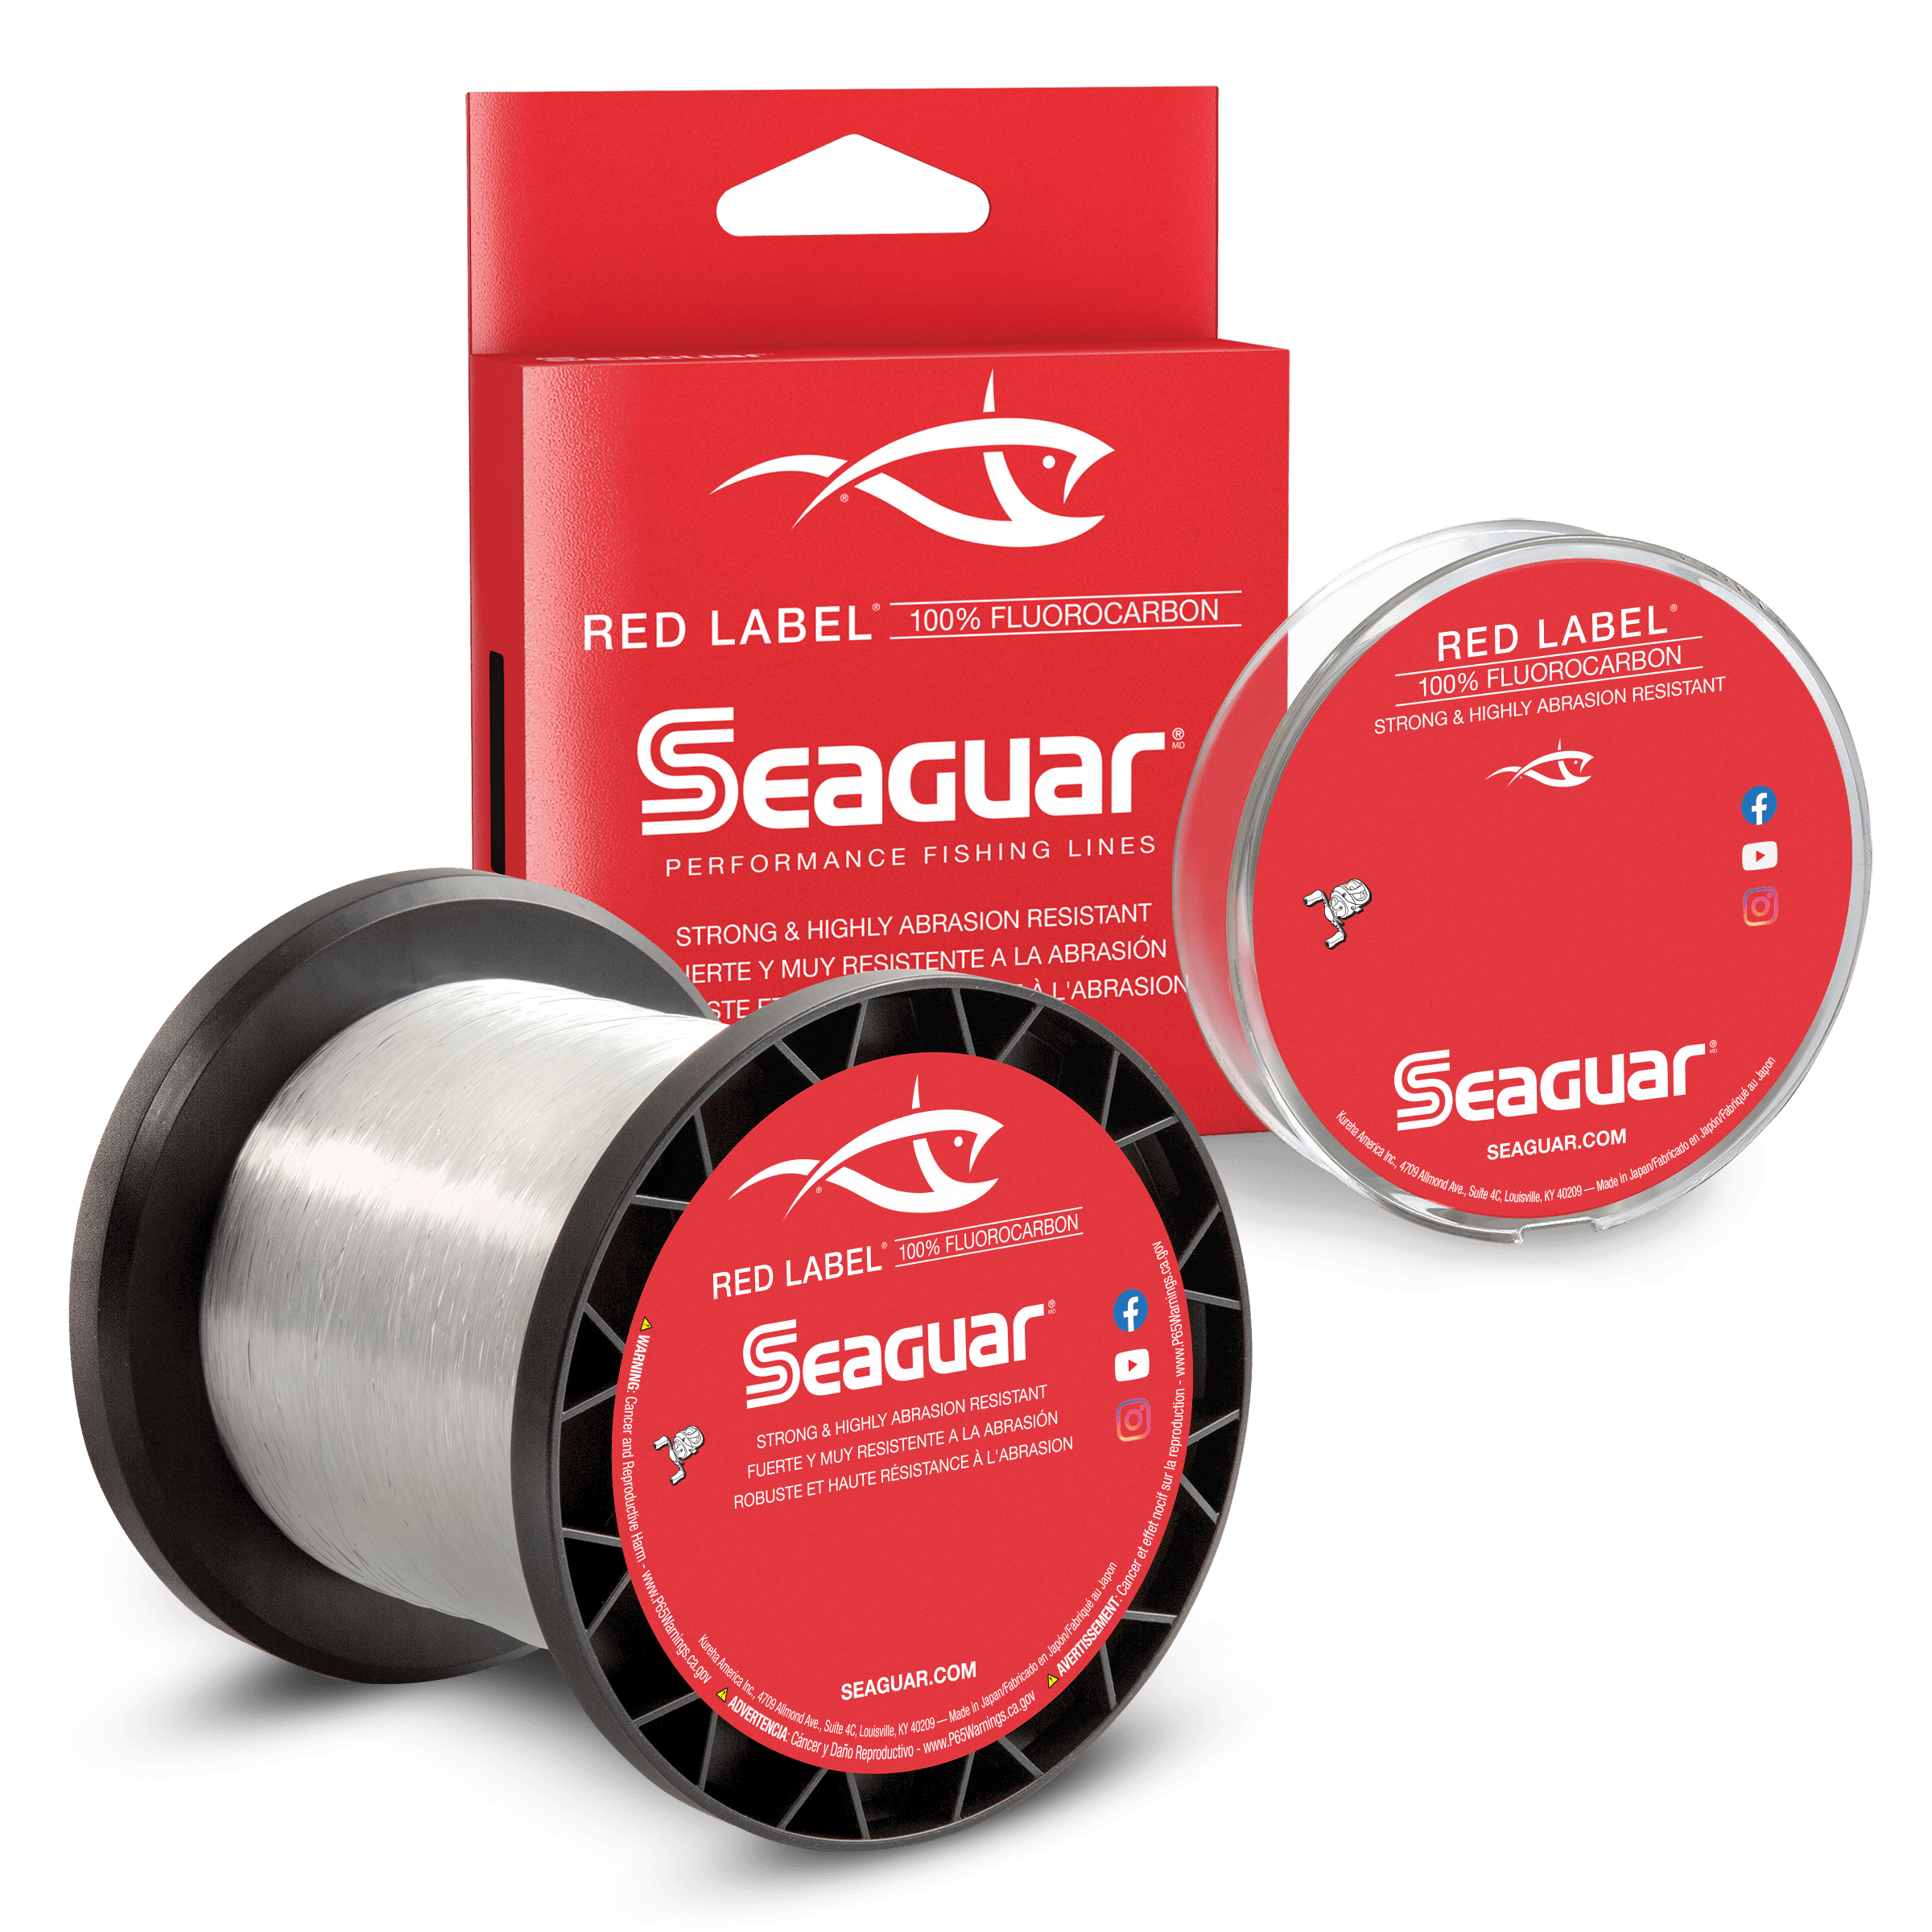 Seaguar IceX Fluorocarbon Fishing Line – Low Memory, Micro